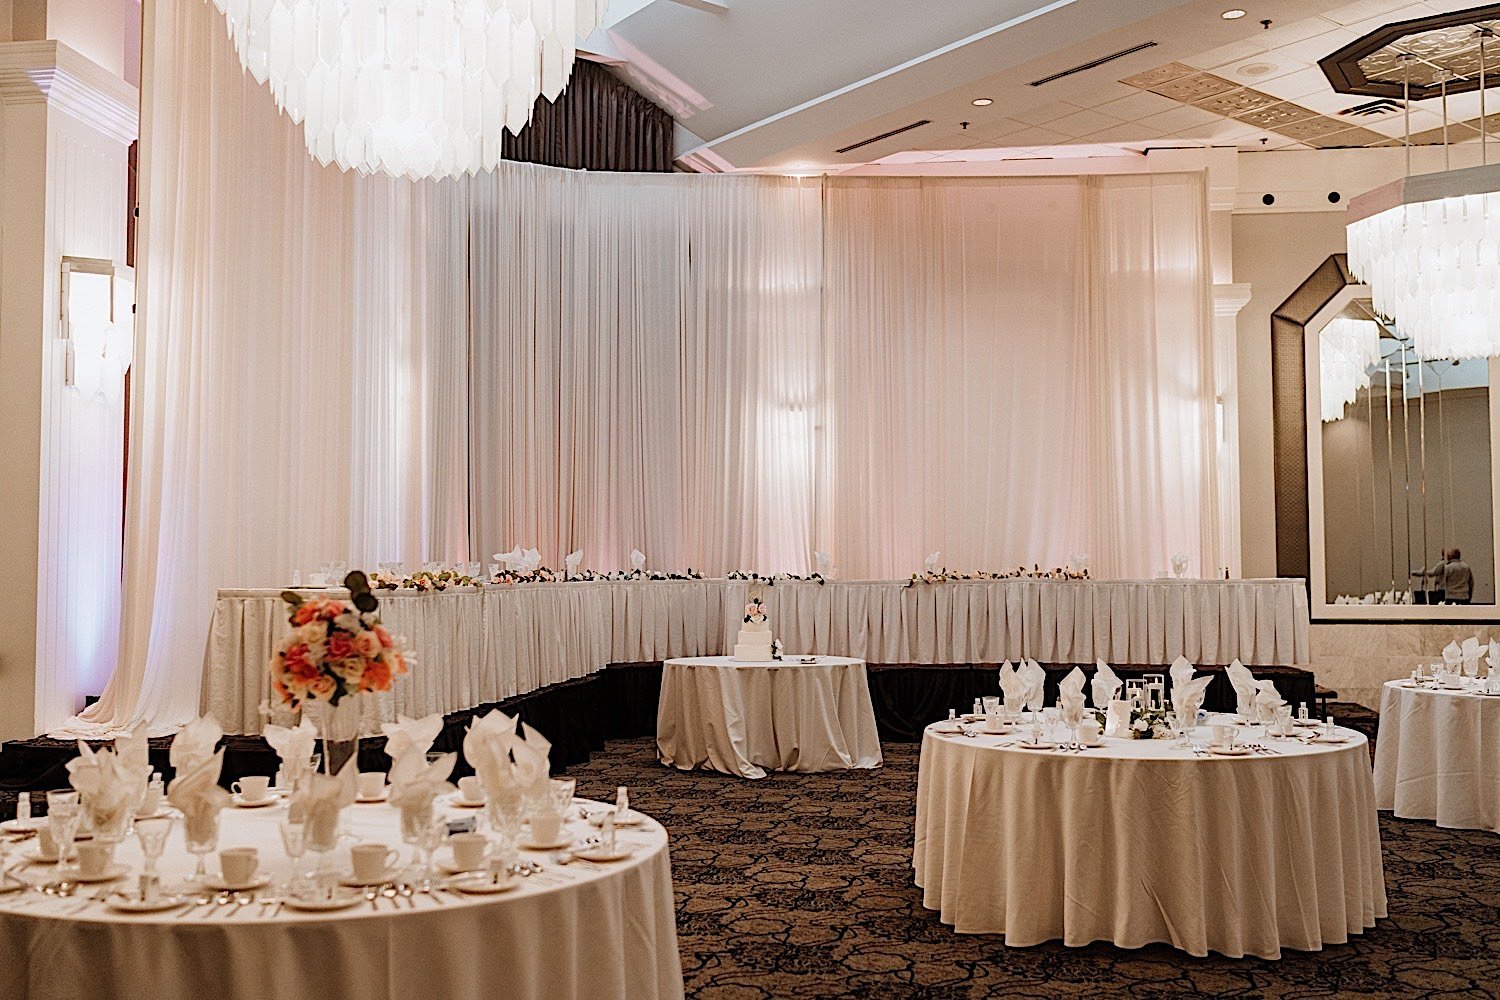 Chicagoland ballroom set up for a wedding reception with all white decorations